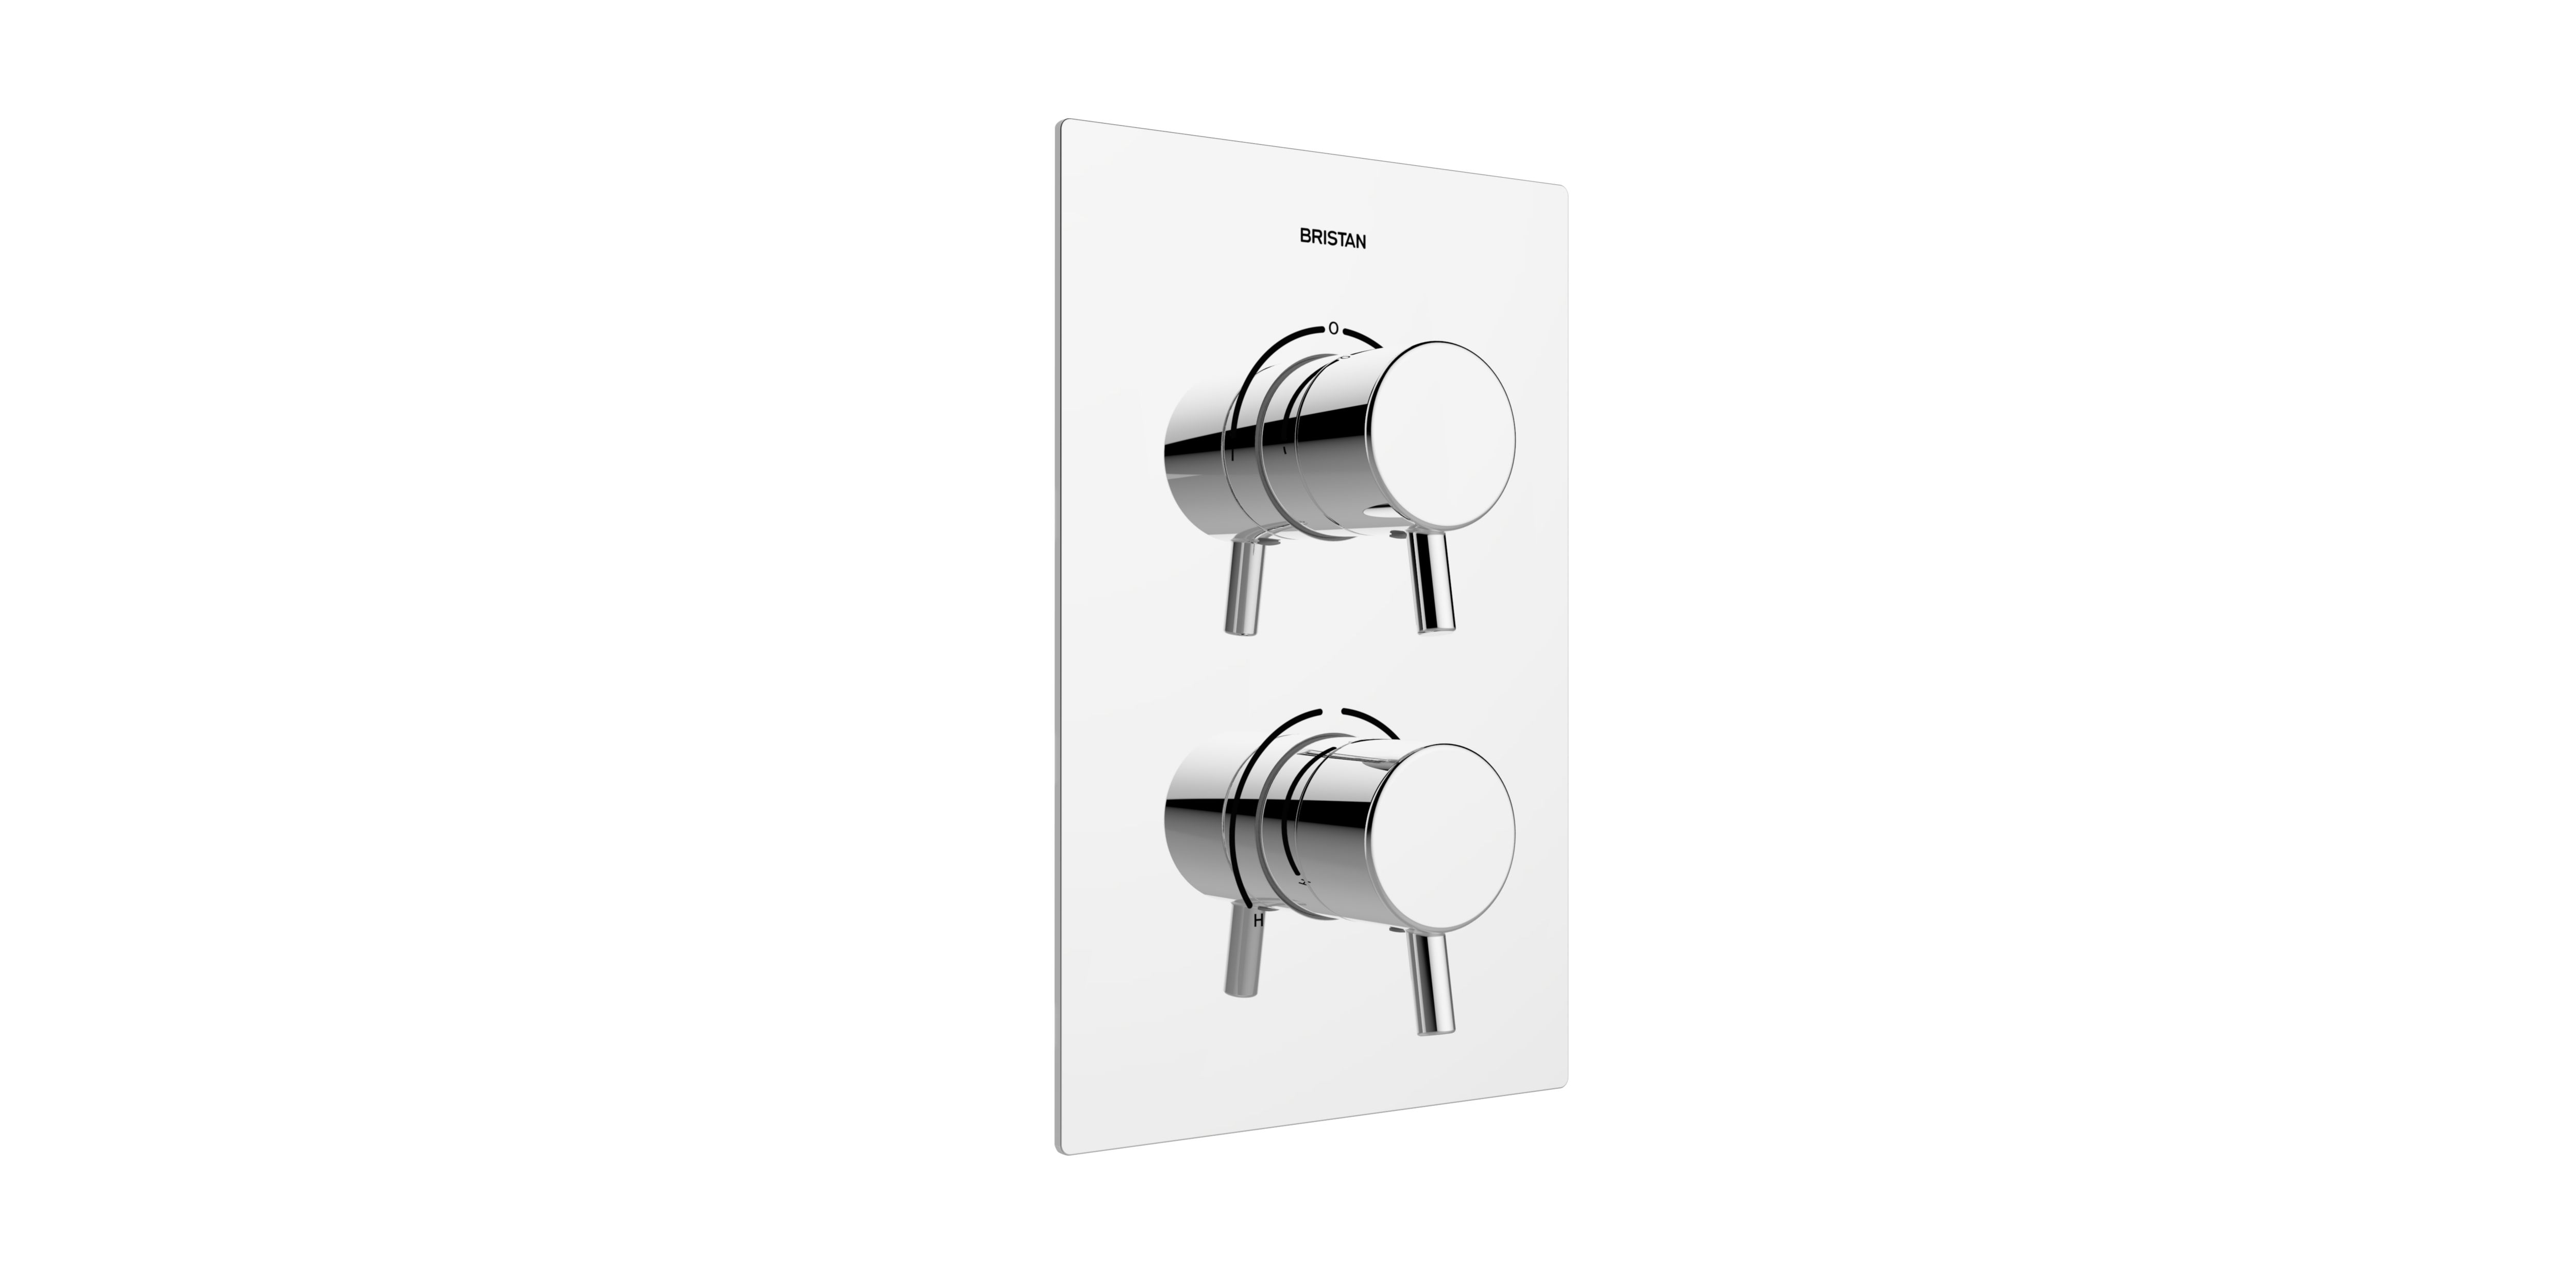 Bristan Prism Recessed Thermostatic Dual Control Shower Valve with Integral Two Outlet Diverter - Chrome